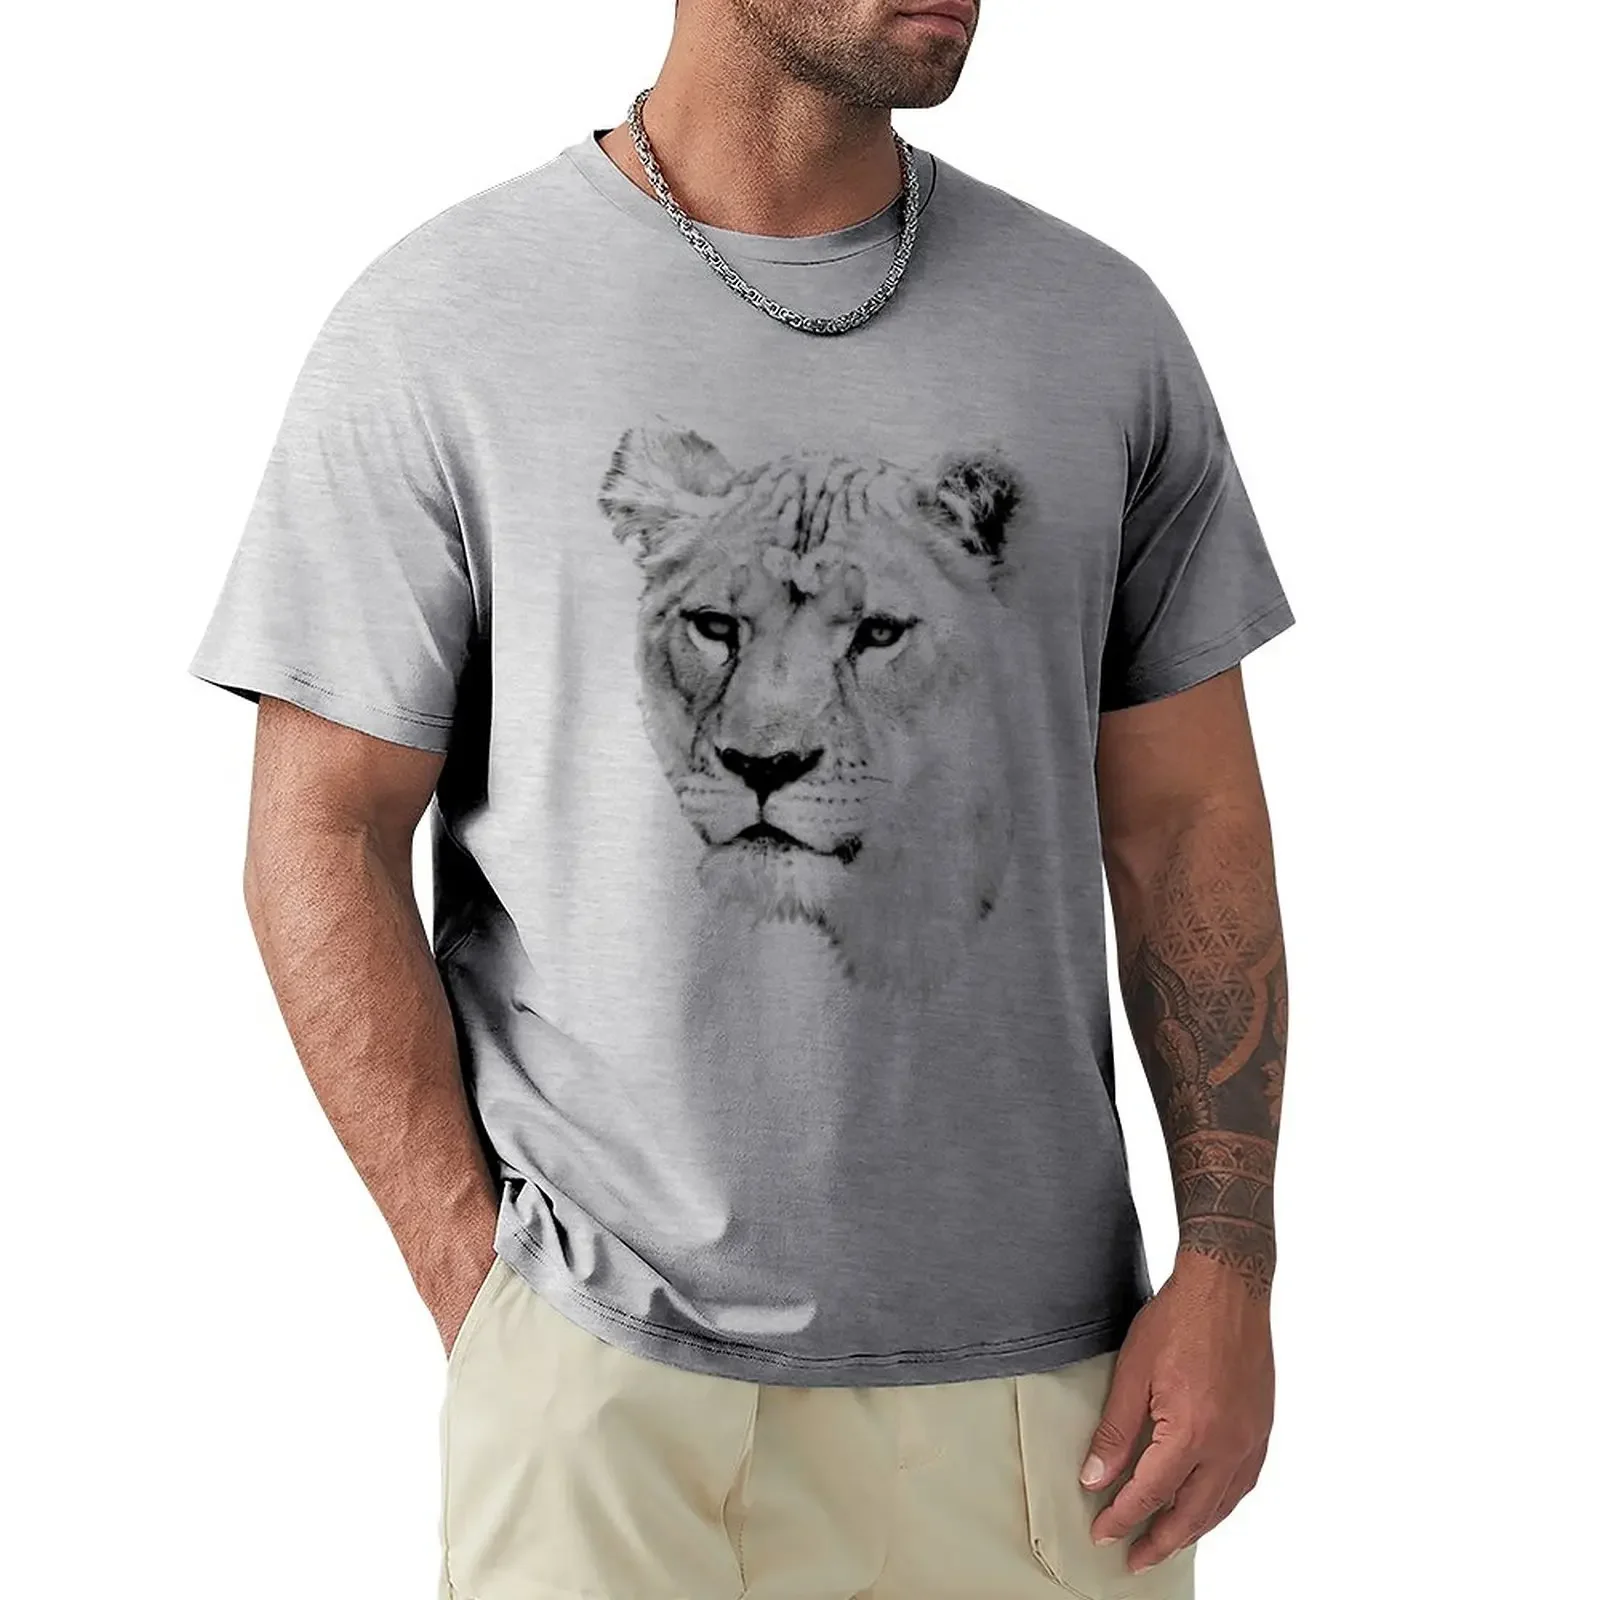 

Lioness. Female Lion. Digital Wildlife Engraving Image T-Shirt Short sleeve tee summer top big and tall t shirts for men